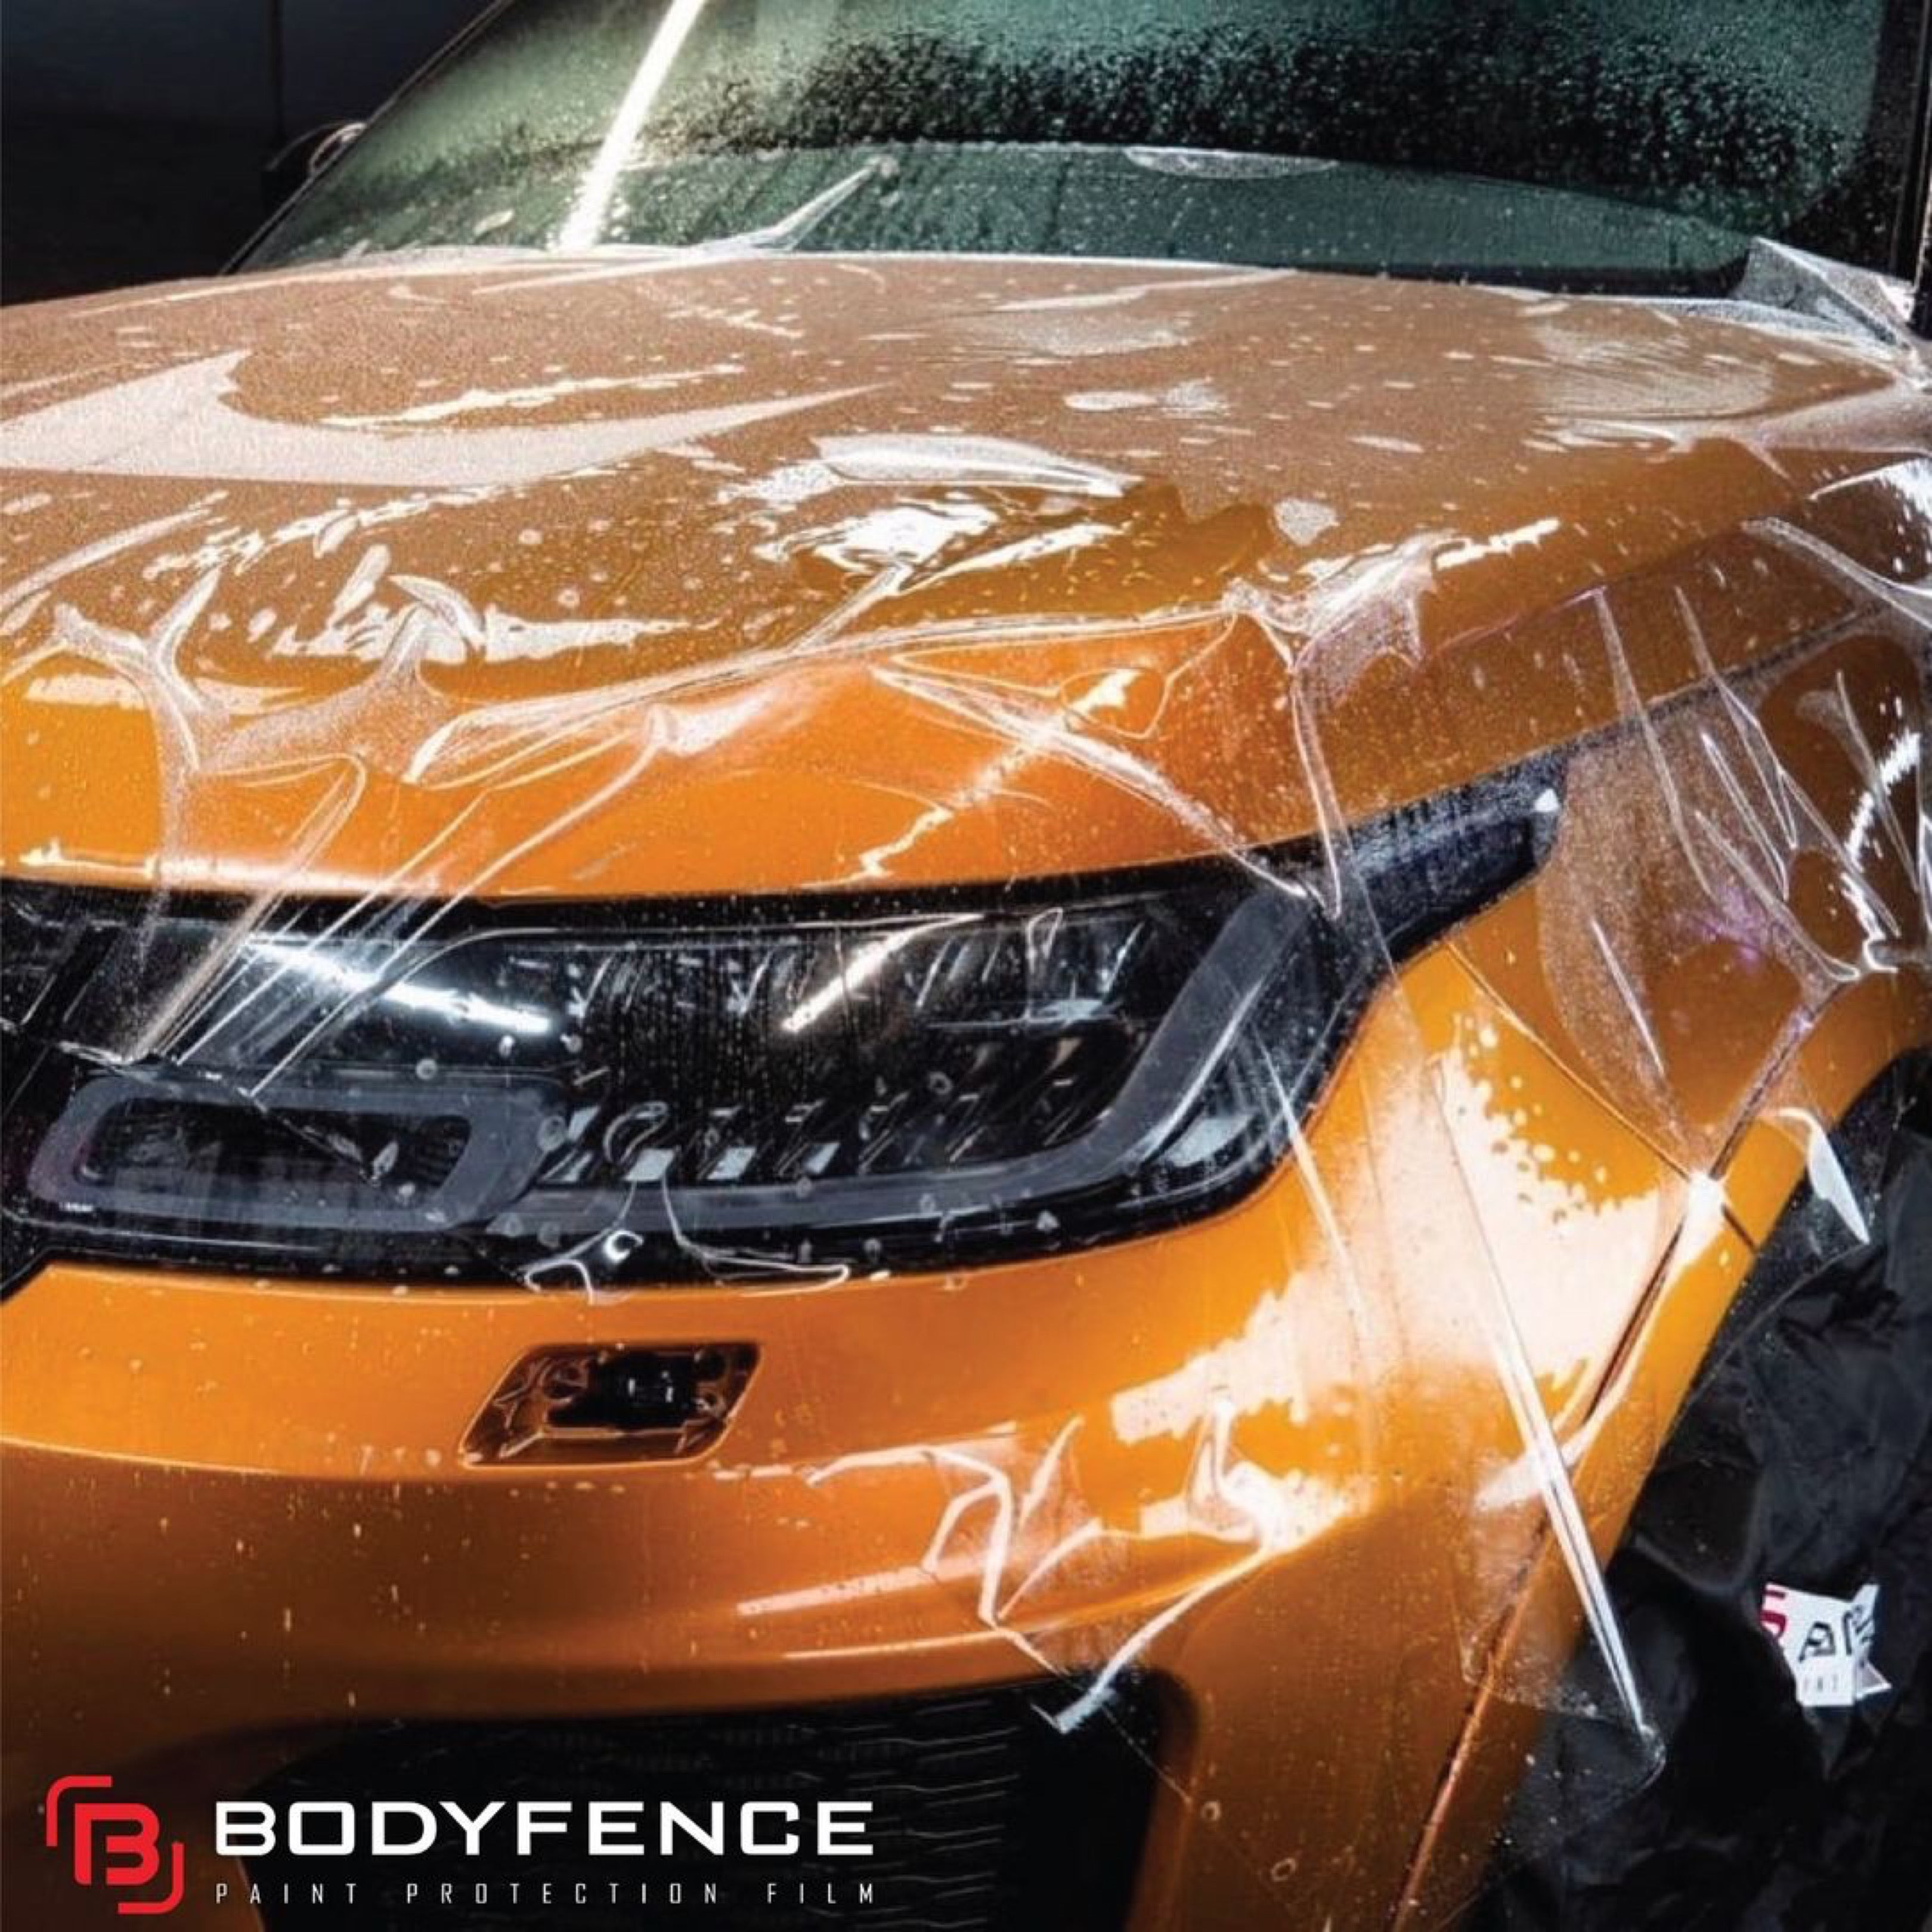 PPF Paint Protection Film Clear Bra - 24 X 50FT